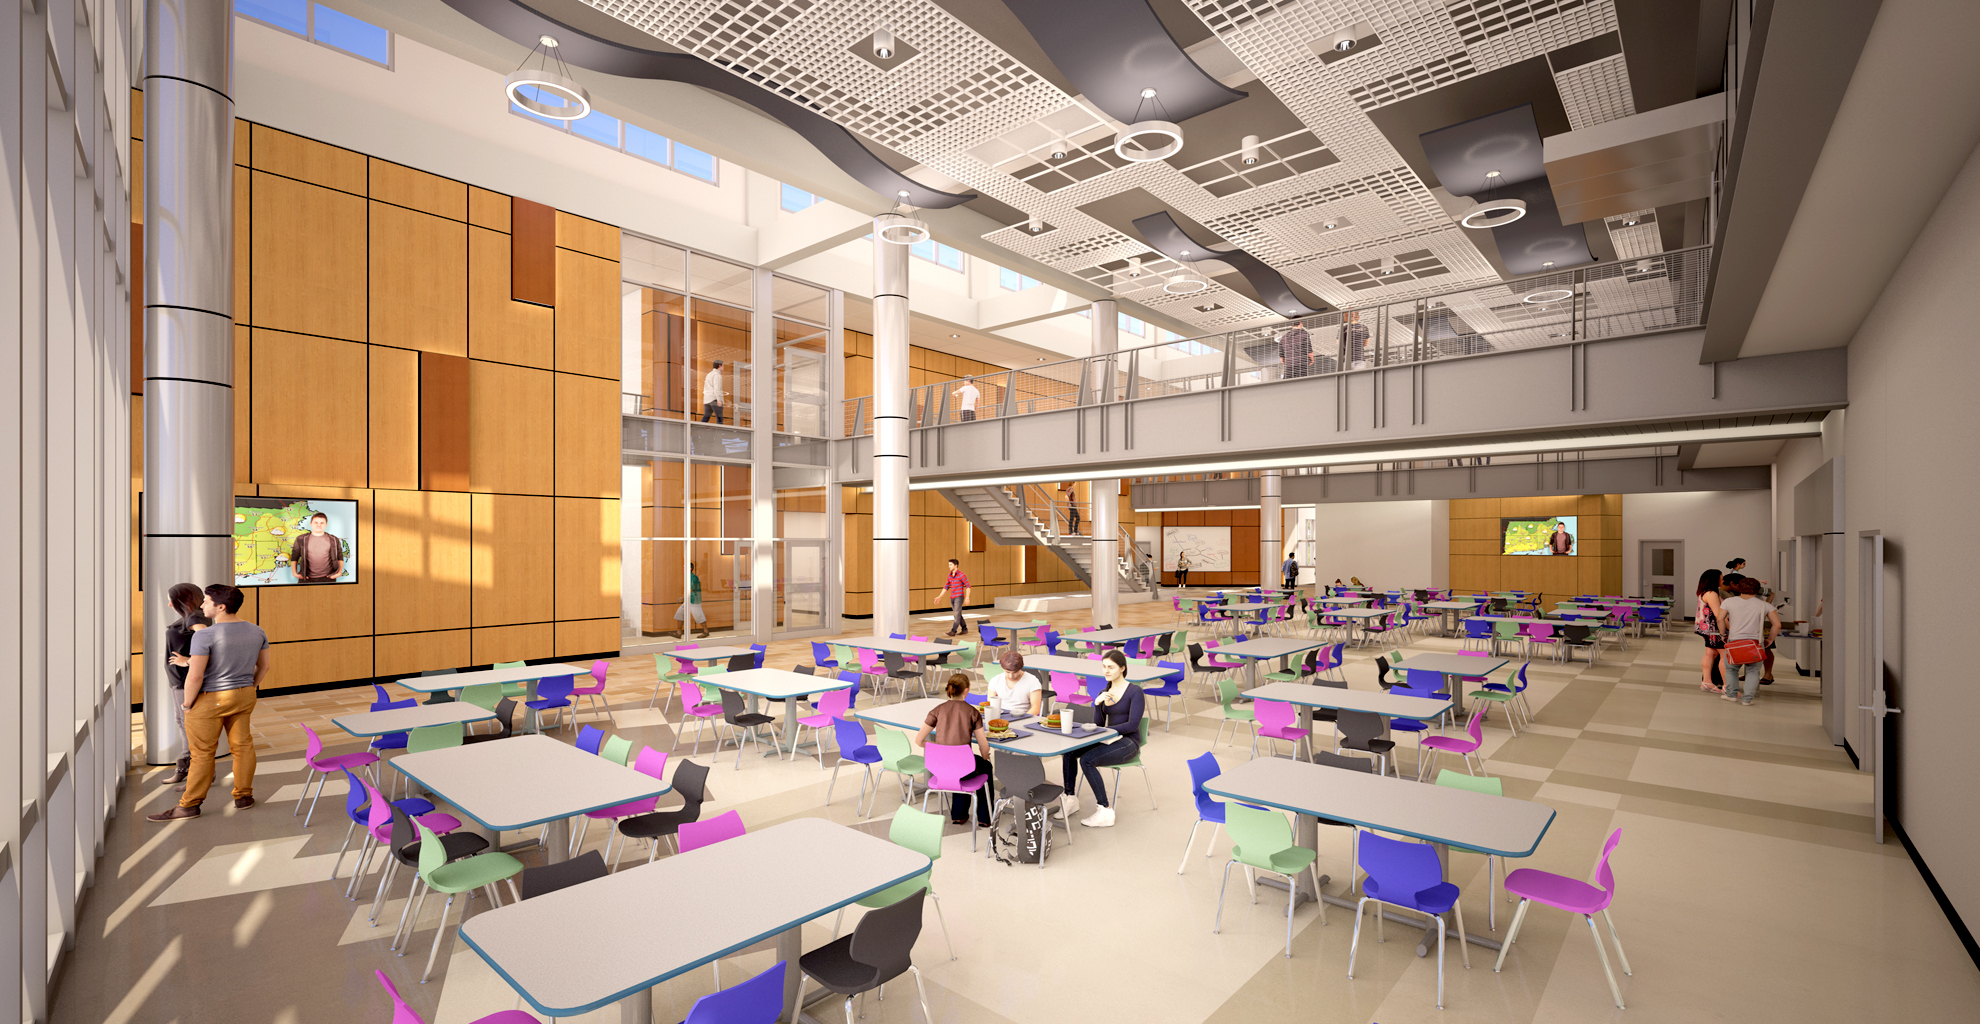 Student Dining Room For Public Use